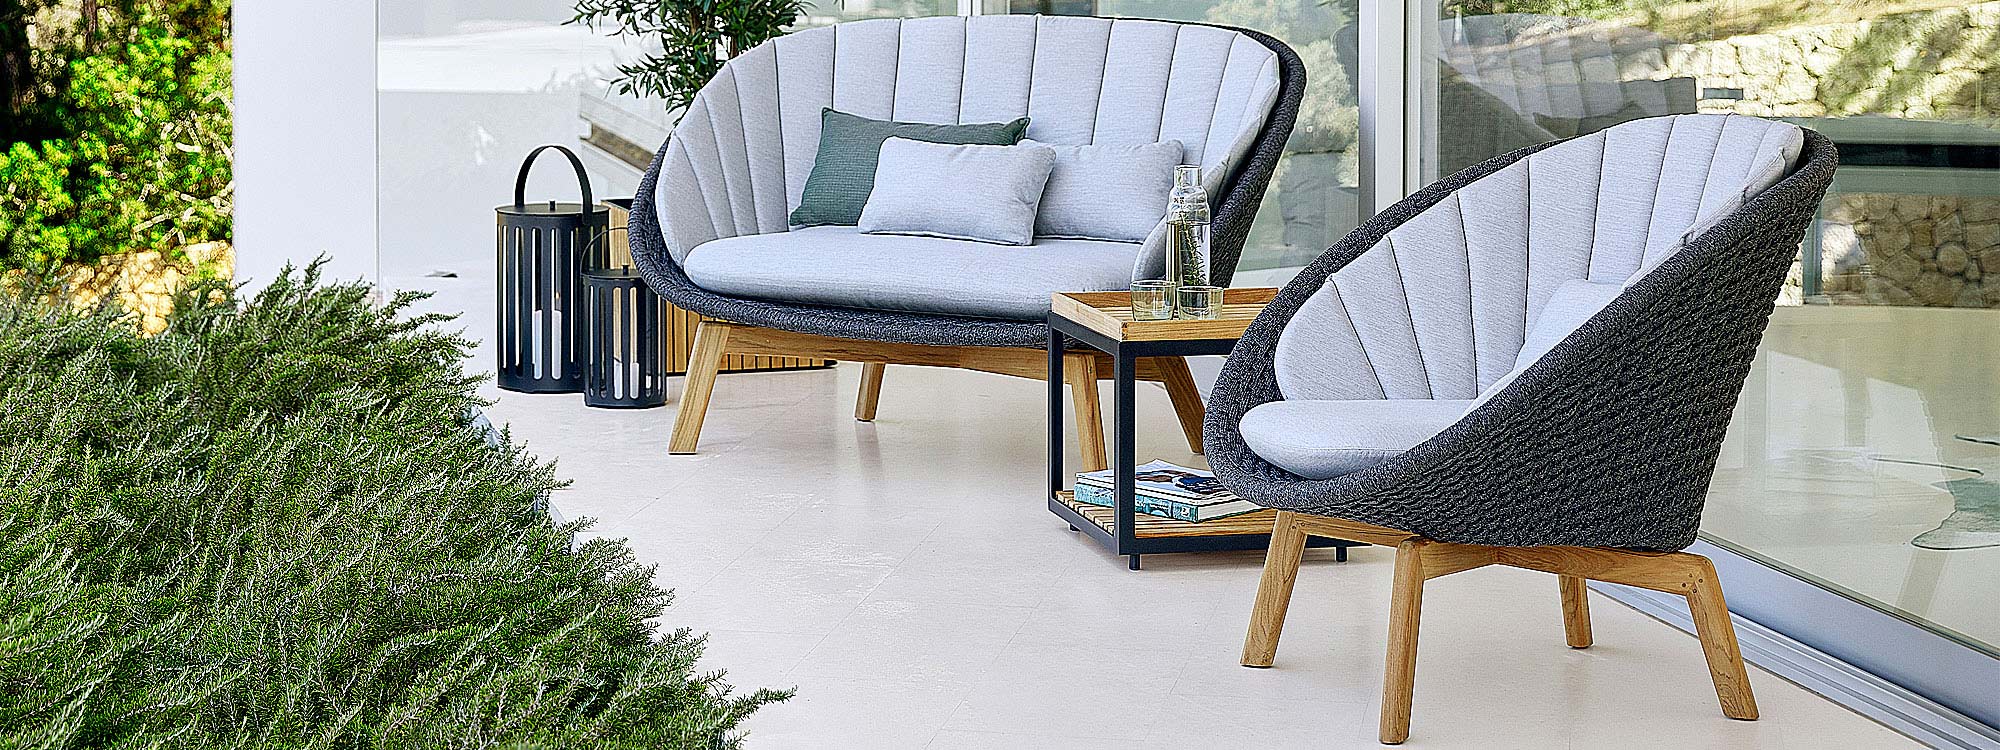 Peacock garden easy furniture includes a designer 2 seat garden sofa & modern outdoor lounge chair in all-weather furniture materials by Cane-line.